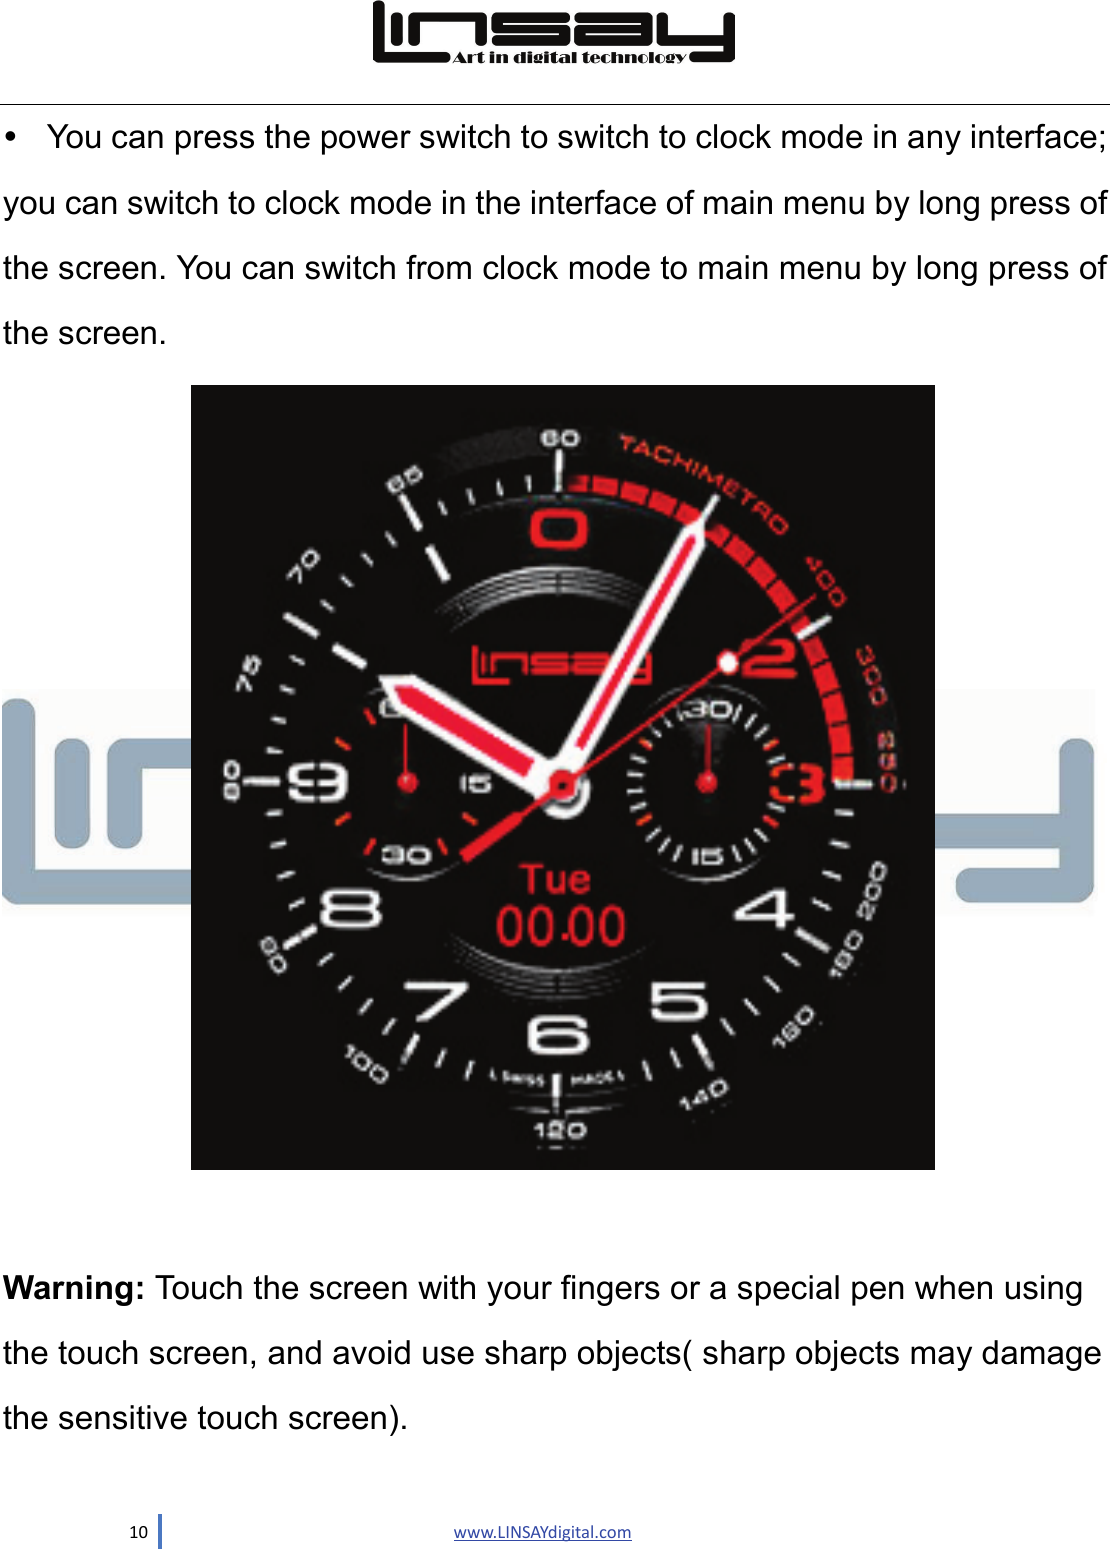  10                               www.LINSAYdigital.com   You can press the power switch to switch to clock mode in any interface; you can switch to clock mode in the interface of main menu by long press of the screen. You can switch from clock mode to main menu by long press of the screen.   Warning: Touch the screen with your fingers or a special pen when using the touch screen, and avoid use sharp objects( sharp objects may damage the sensitive touch screen). 